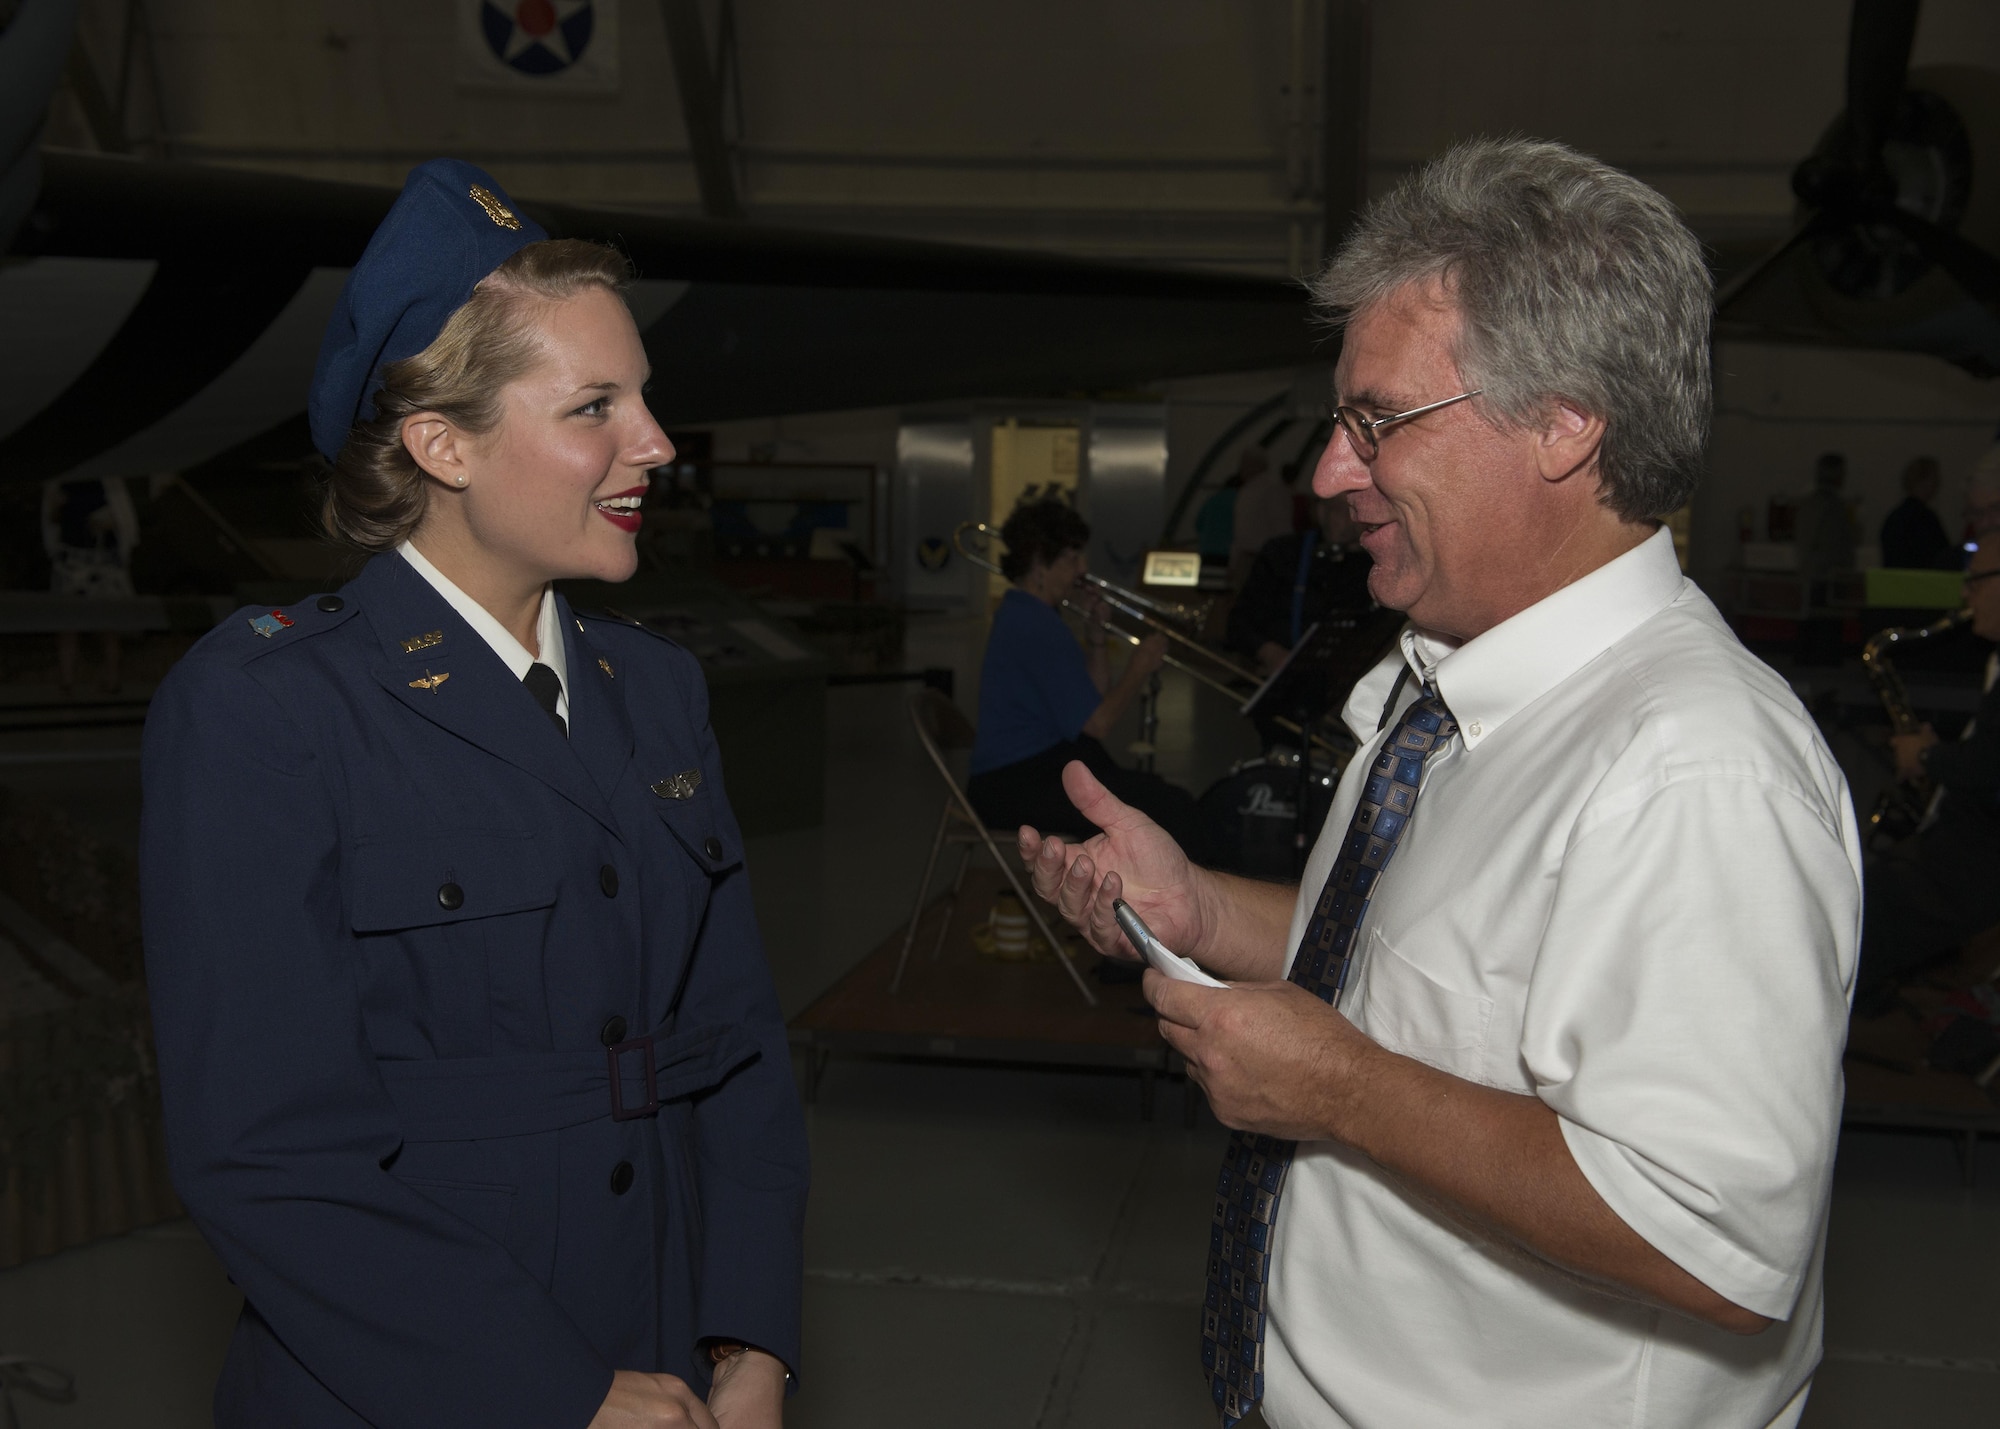 Andrew West, Delaware State News, speaks to Tricia Upchurch, Air Mobility Command Museum educator, who is dressed as a member of the World War II Women Airforce Service Pilots (WASP), during the Festival of Flight Exclusive Party and Raffle Sept. 23, 2016, at the Air Mobility Command Museum on Dover Air Force Base, Del. The event raised about $20,000 for the AMC Museum Foundation. (U.S. Air Force photo by Senior Airman Zachary Cacicia)